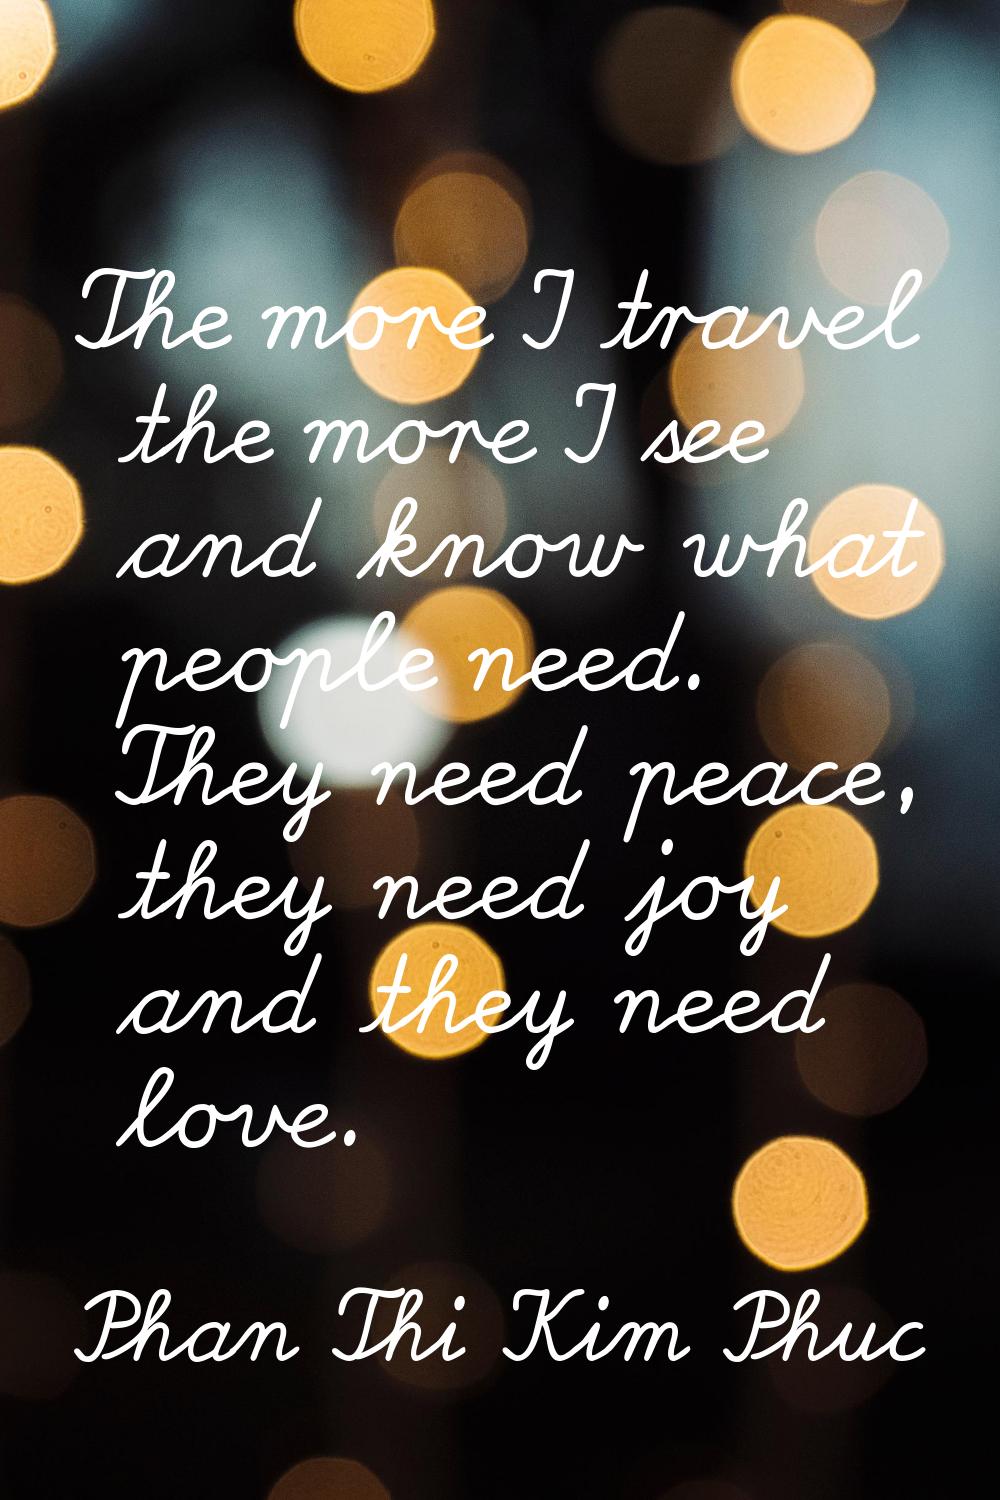 The more I travel the more I see and know what people need. They need peace, they need joy and they